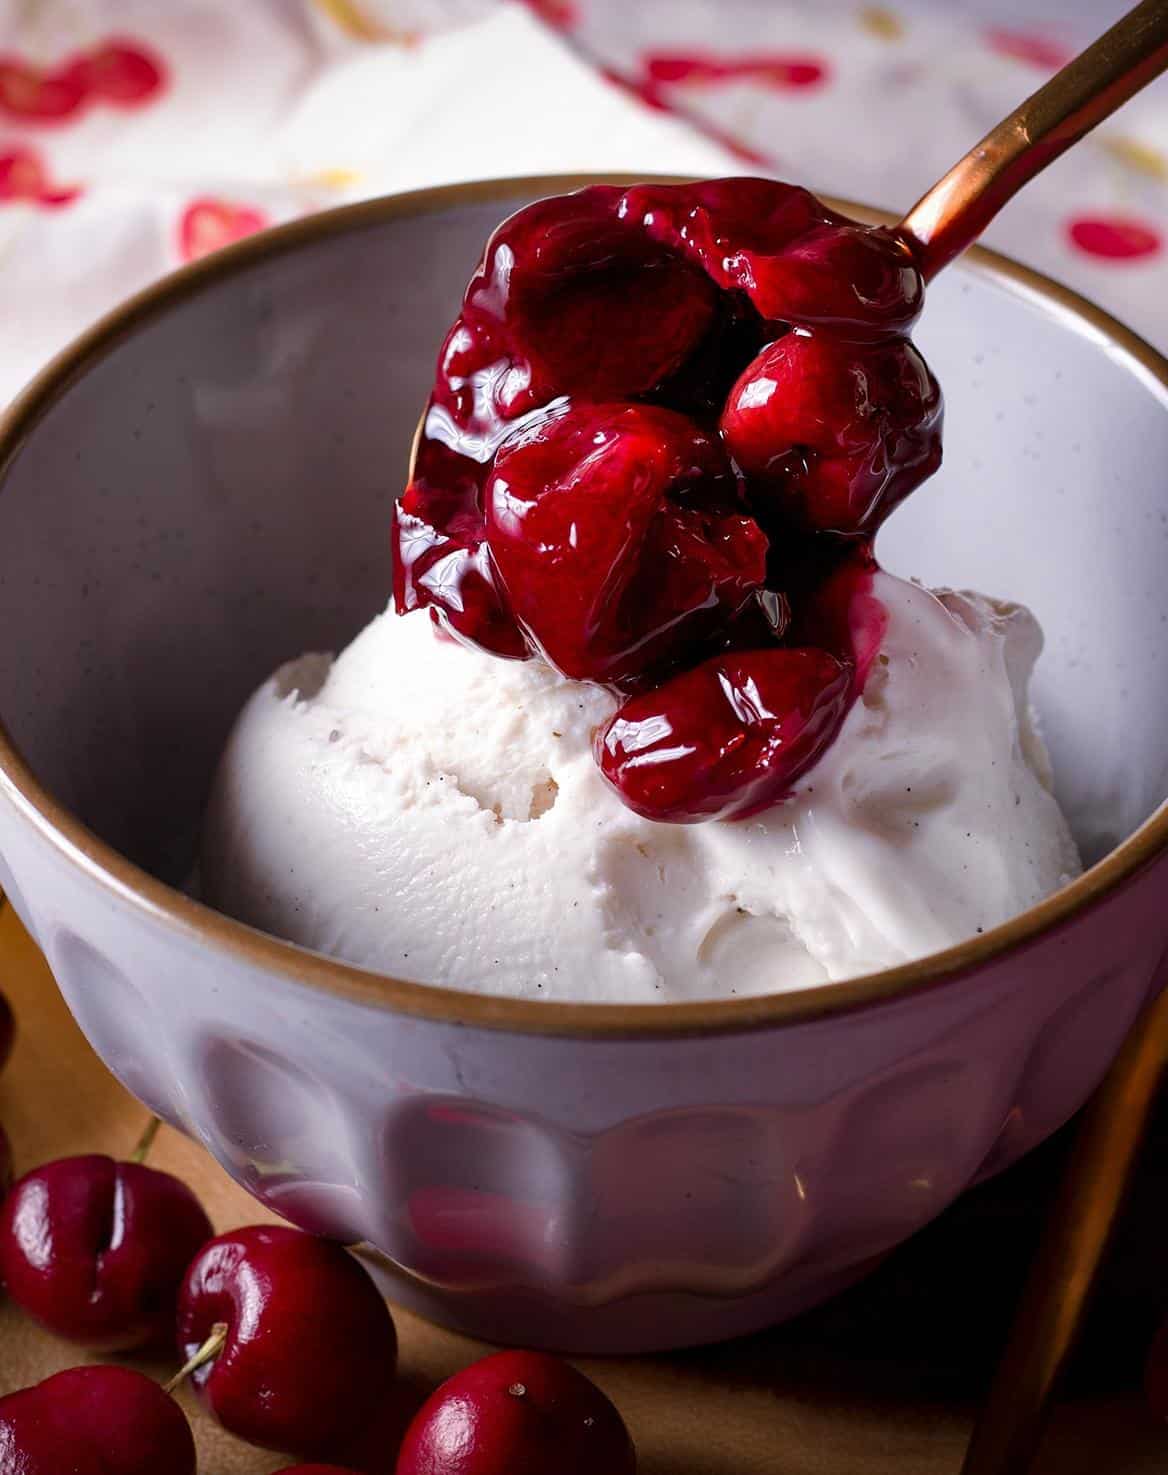  A scoop of vanilla ice cream is the perfect complement to the sour cherries.